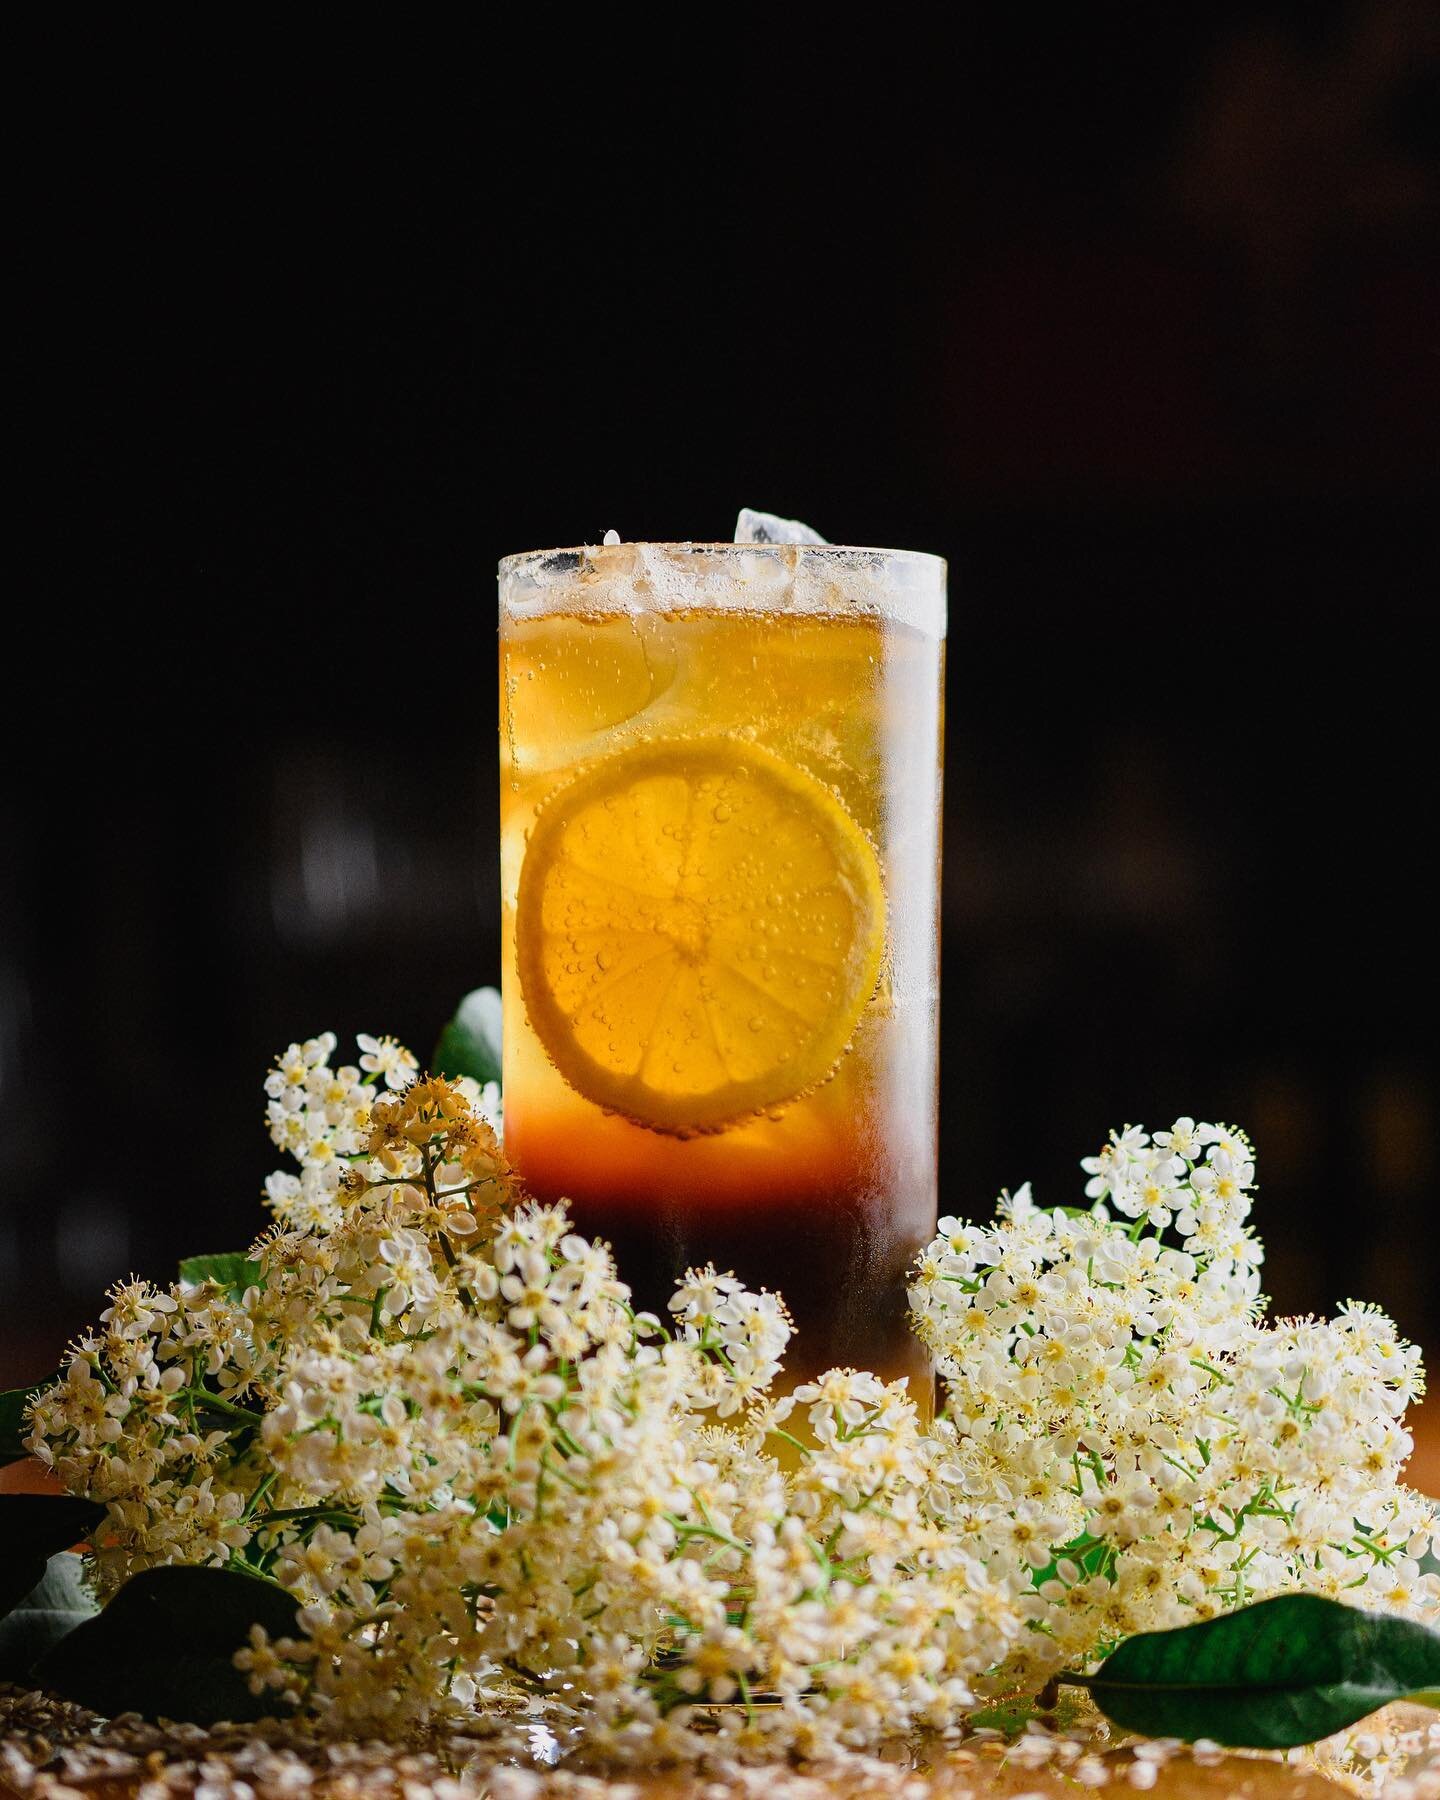 We&rsquo;re so excited to share our new special featuring the beautiful Monin Elderflower syrup. Come try our new Sparkling Elderflower Americano made with espresso, fresh lemon juice, elderflower syrup, and sparkling water. It&rsquo;s refreshing, sw